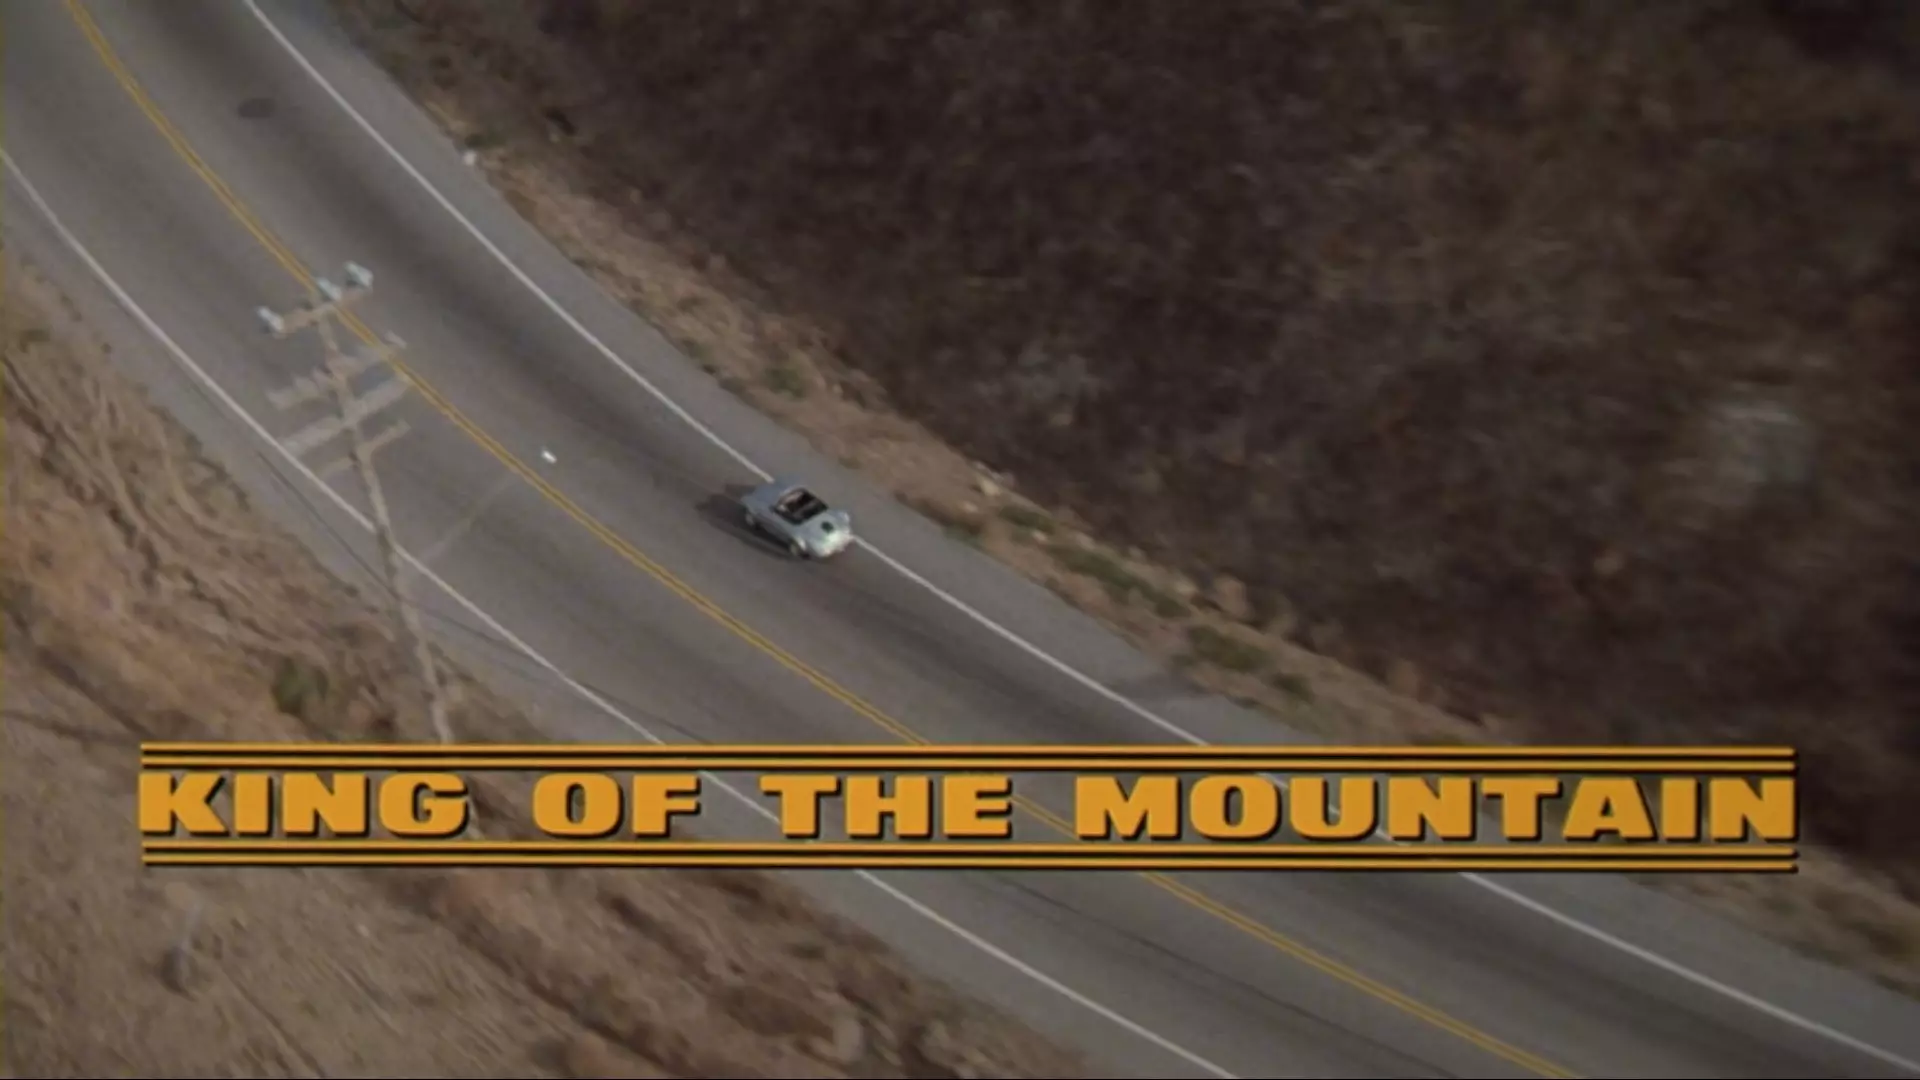 The 1981 Movie King of the Mountain Is Full of Refreshingly Real Car Action | Autance